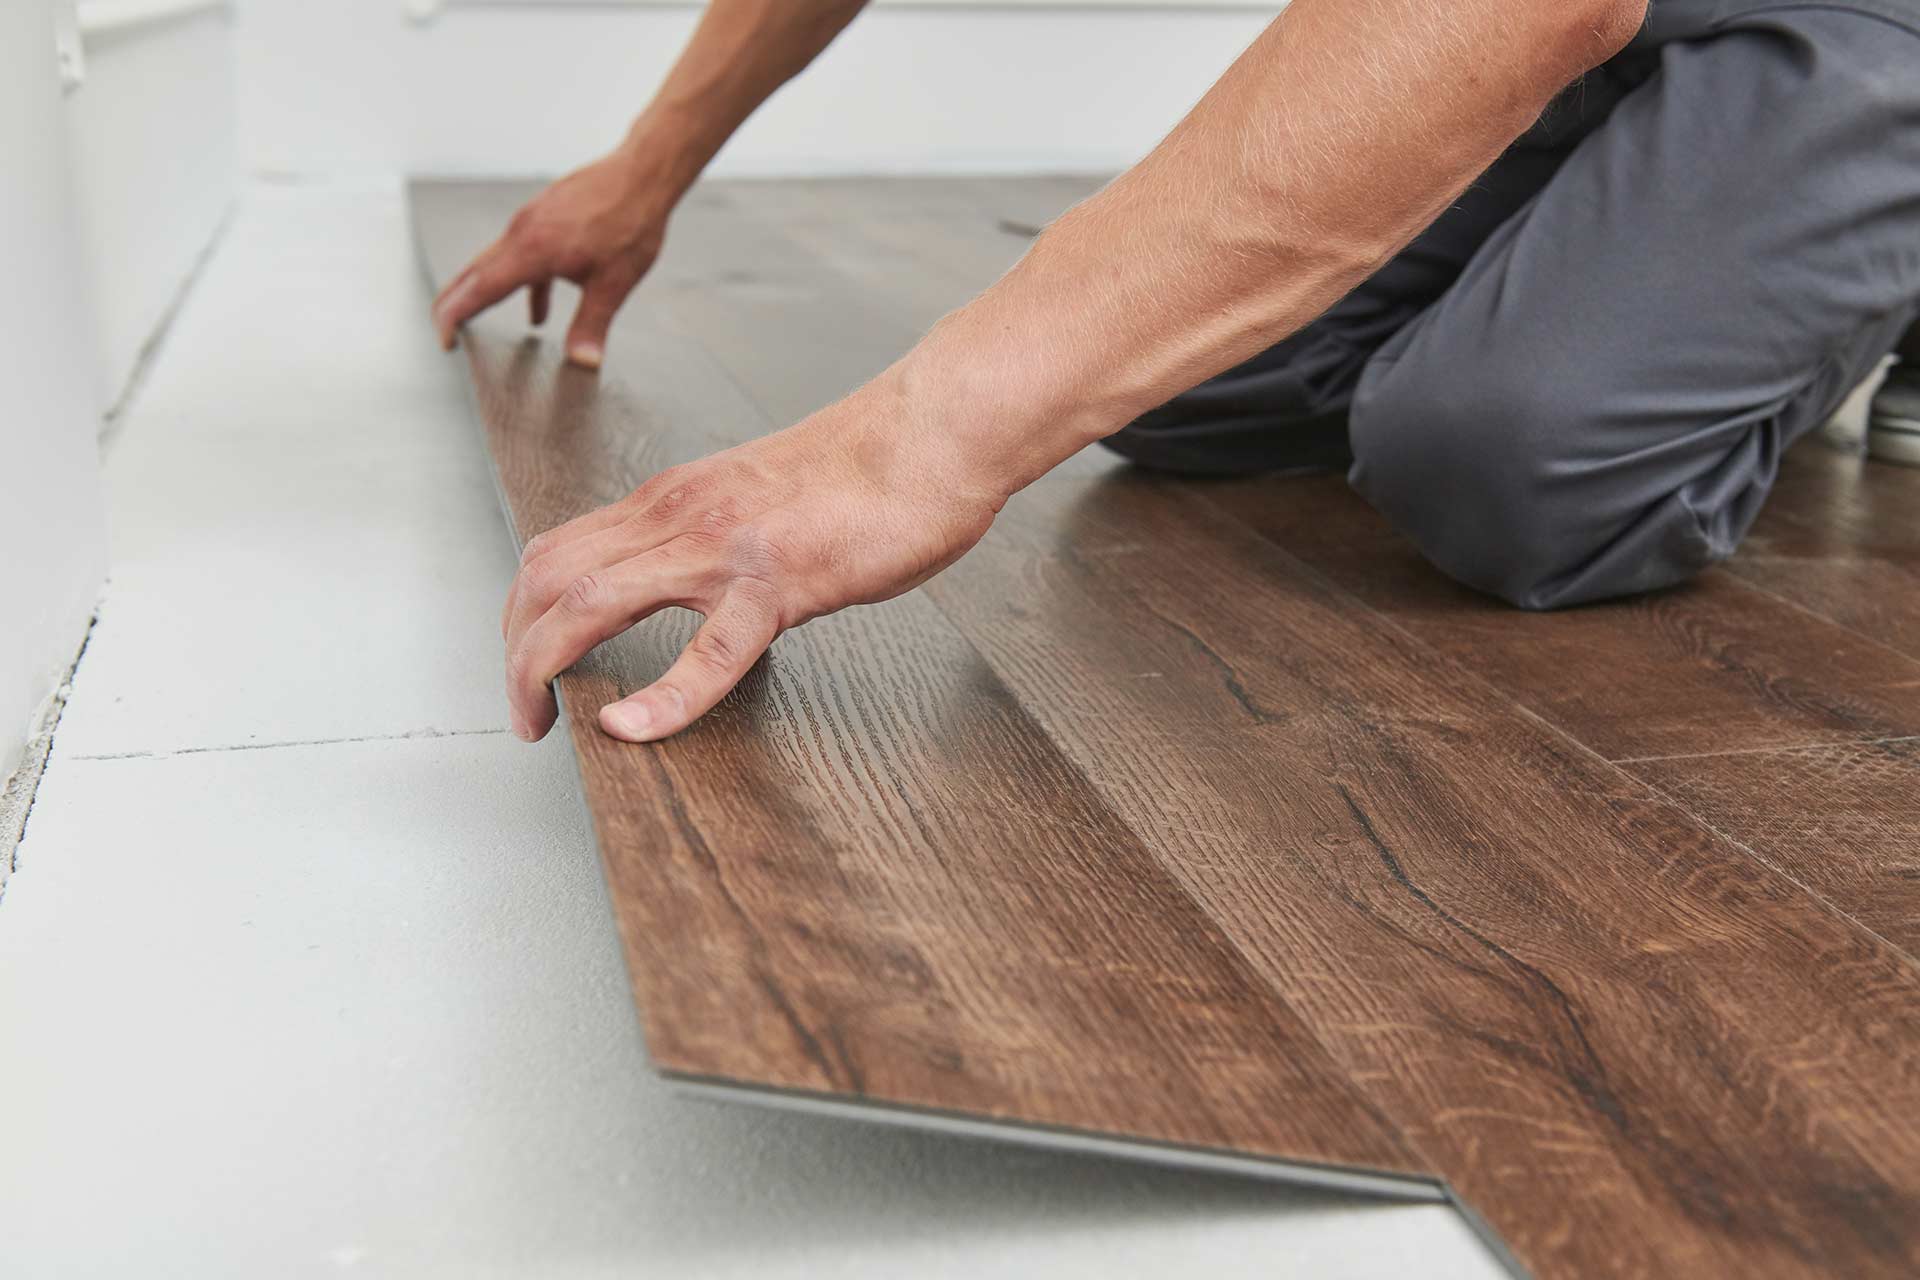 How Do You Know When It’s Time to Replace Your Floors?